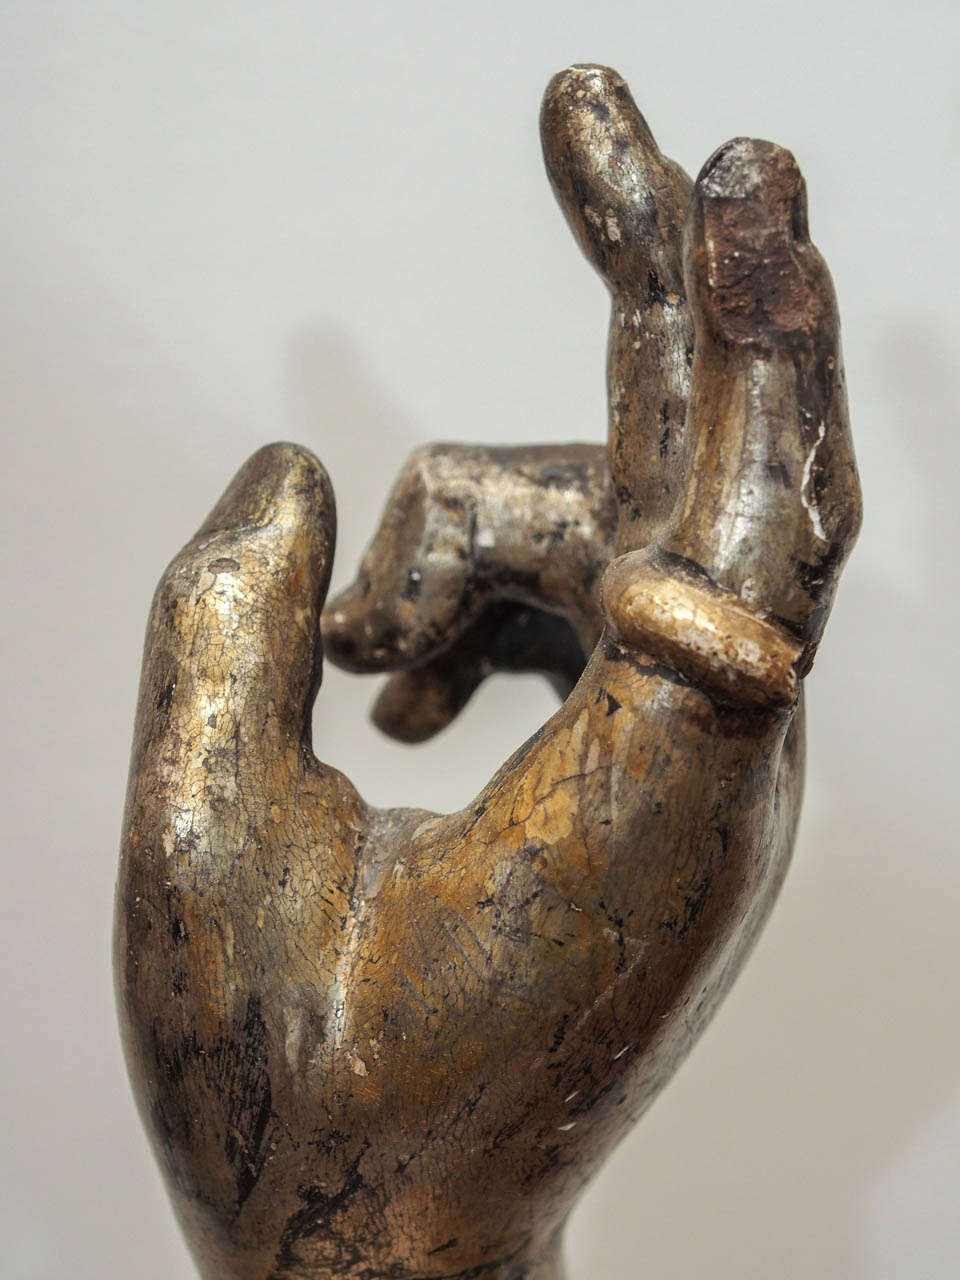 Italian 18th Century Reliquary in the Form of a Hand and Arm